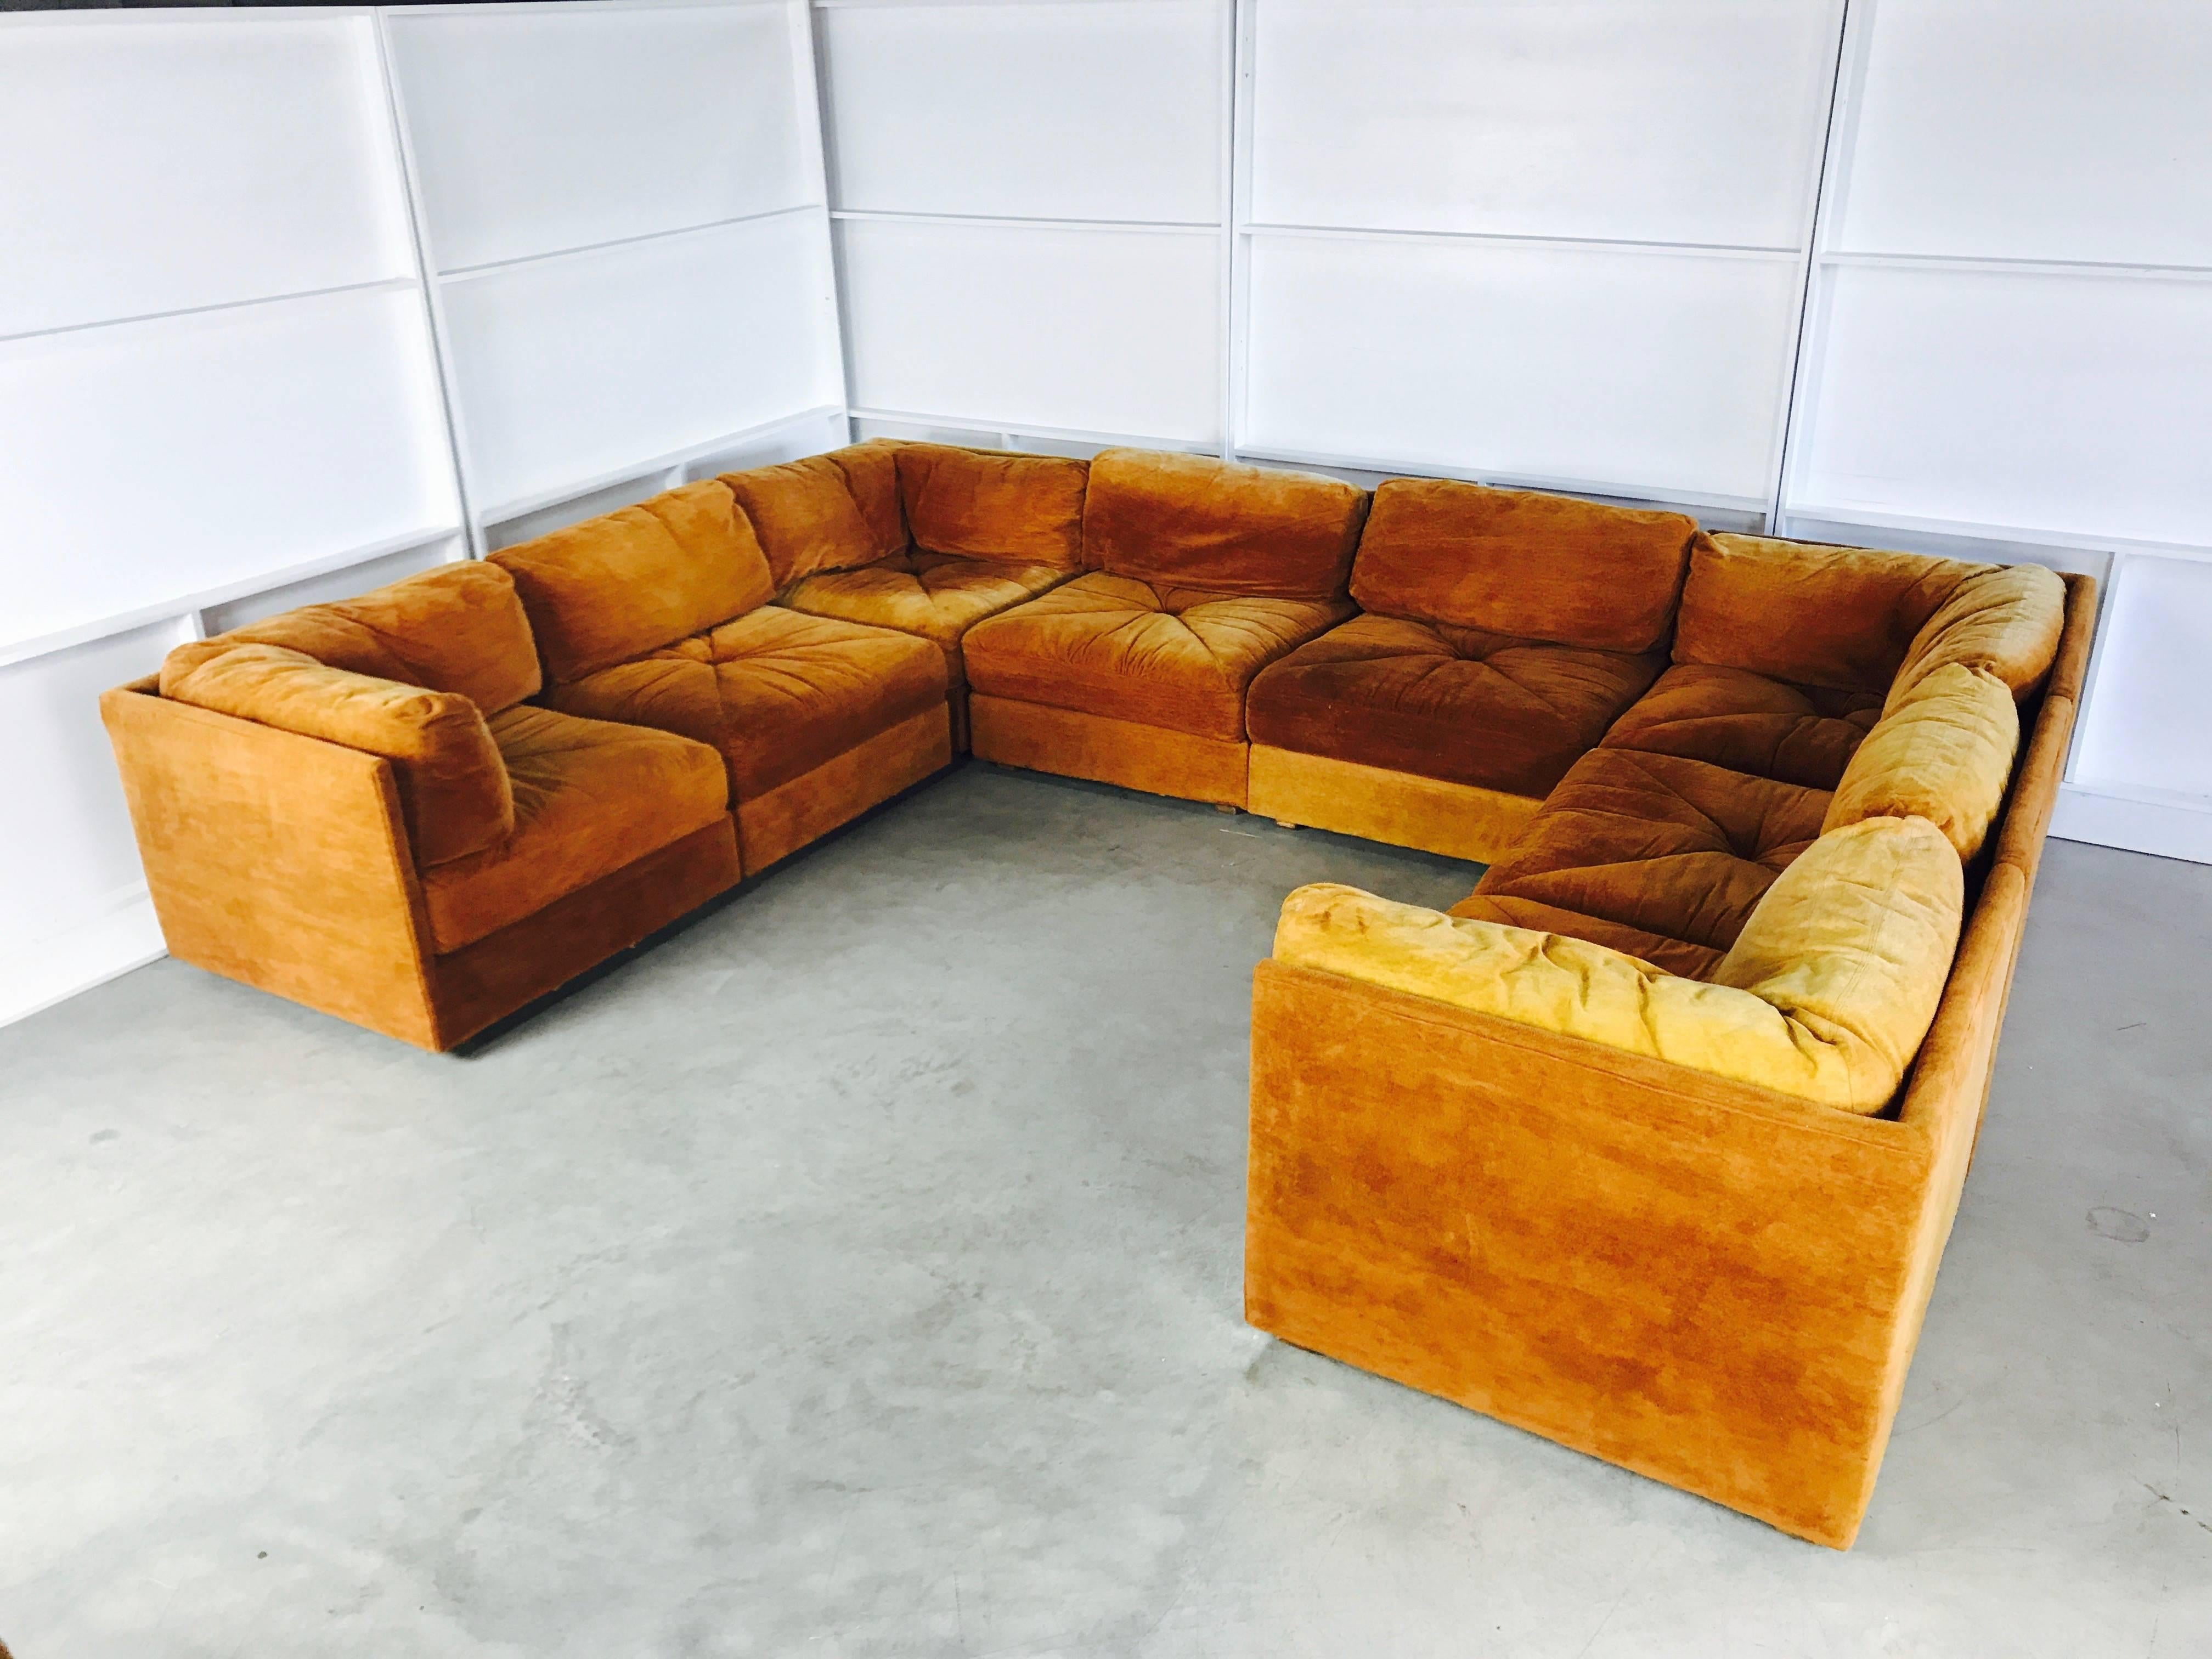 Ten-piece sectional sofa pit in the style of Milo Baughman by Selig. This pit group can be placed in many different configurations. Upholstery is in nice vintage condition but recommend new upholstery.

Dimensions: 33" W x 34" D x